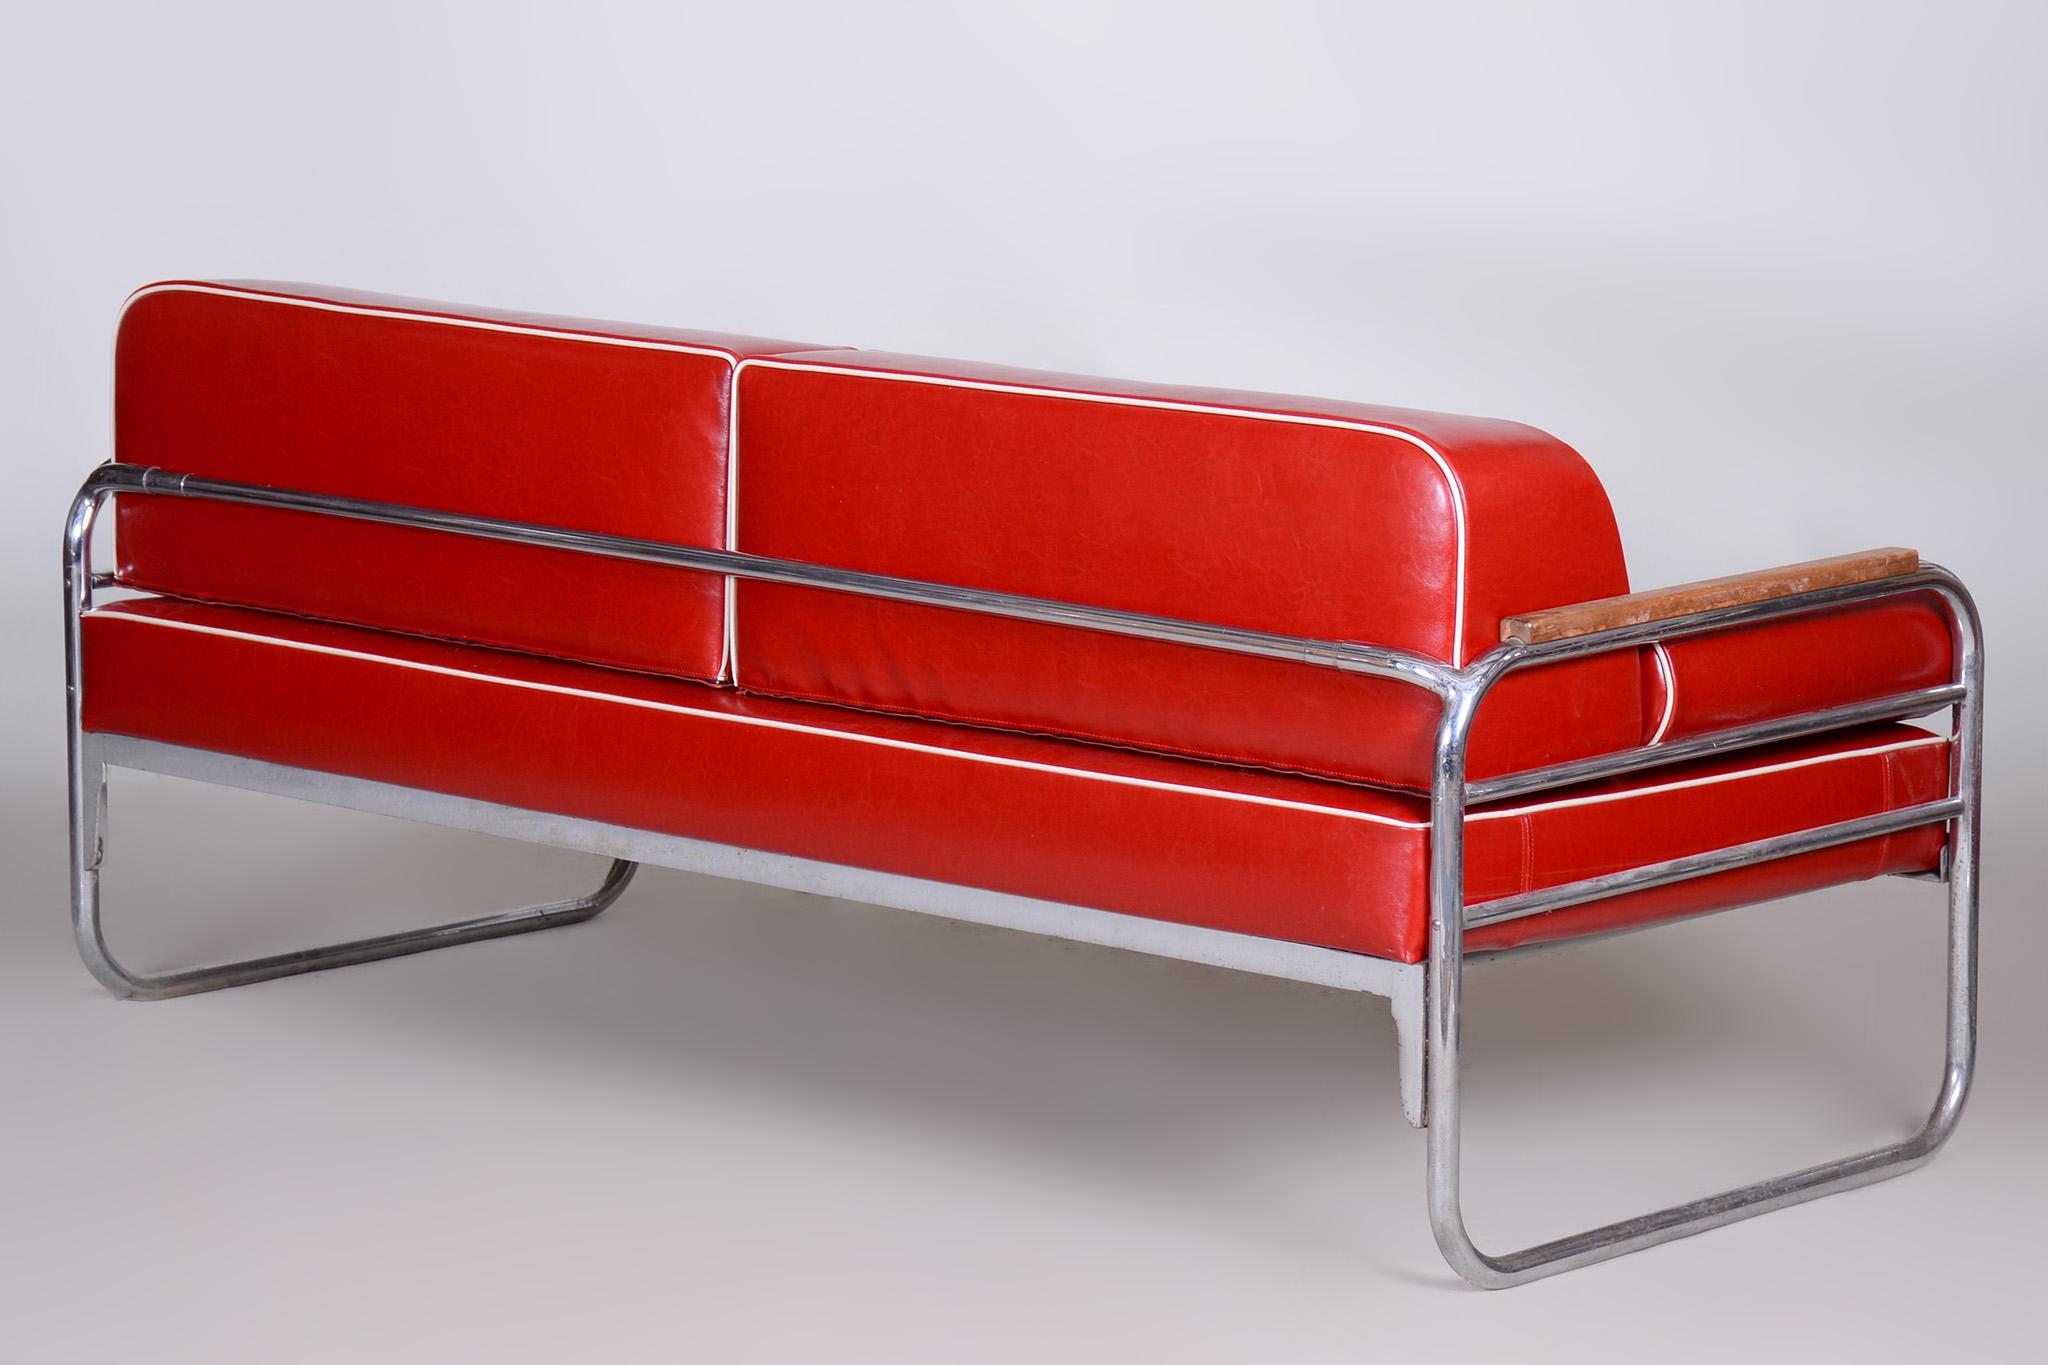 Red High-Quality Leather Bauhaus Sofa by Thonet, Chrome, Fully Restored, 1930s For Sale 3